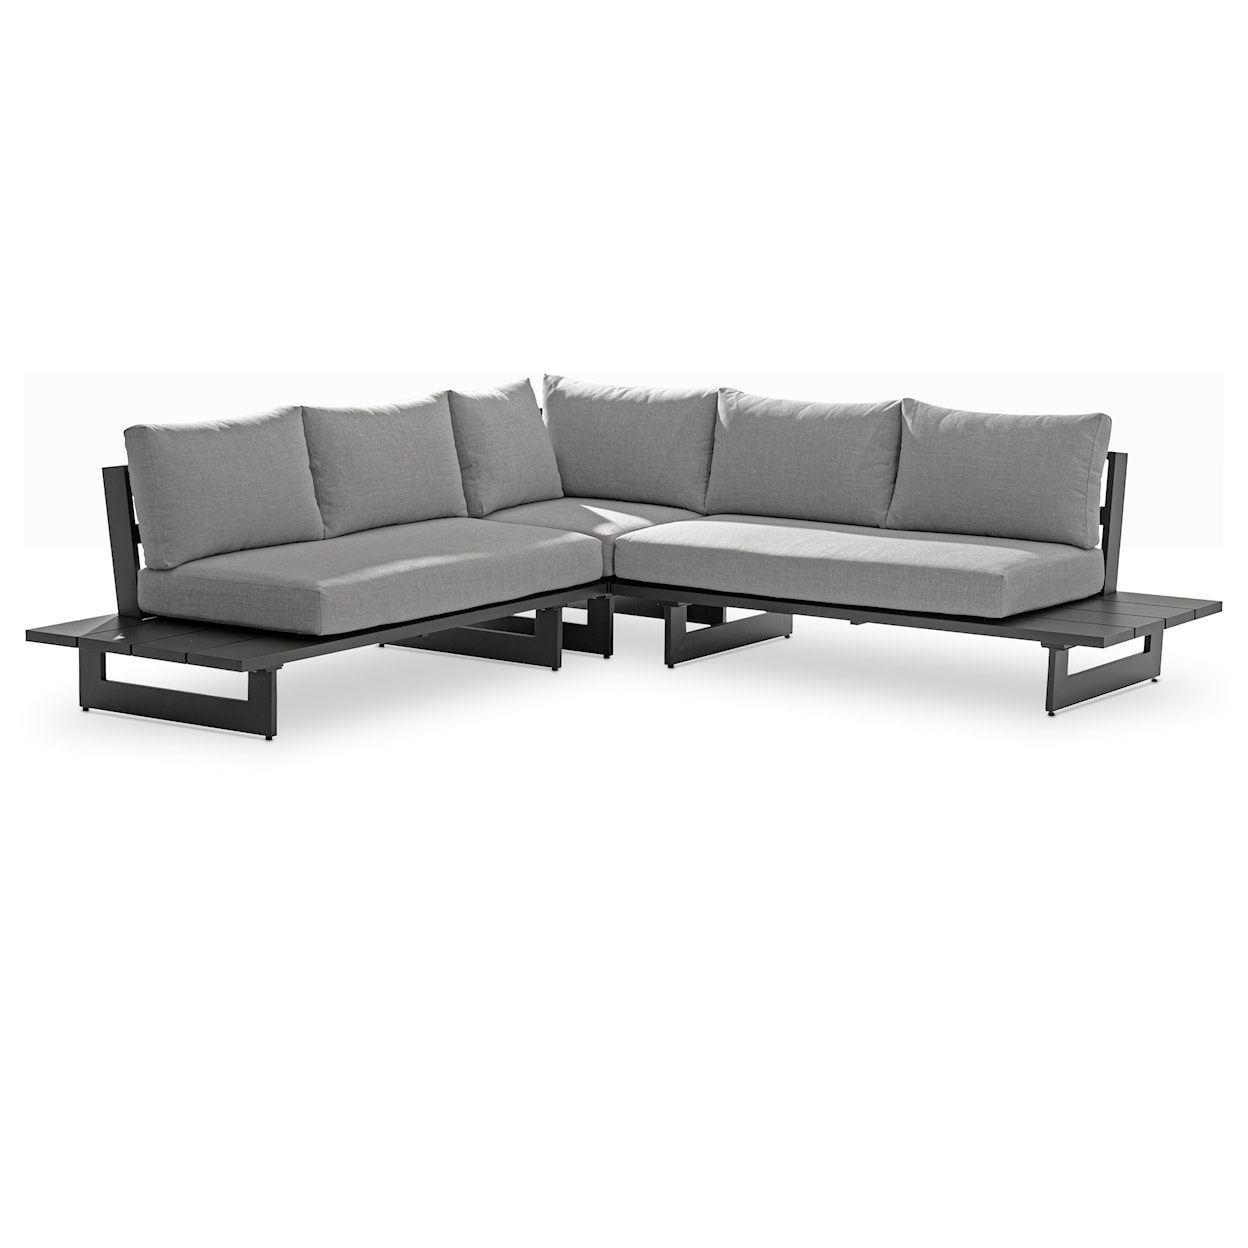 Meridian Furniture Maldives Sectional (3 Boxes)